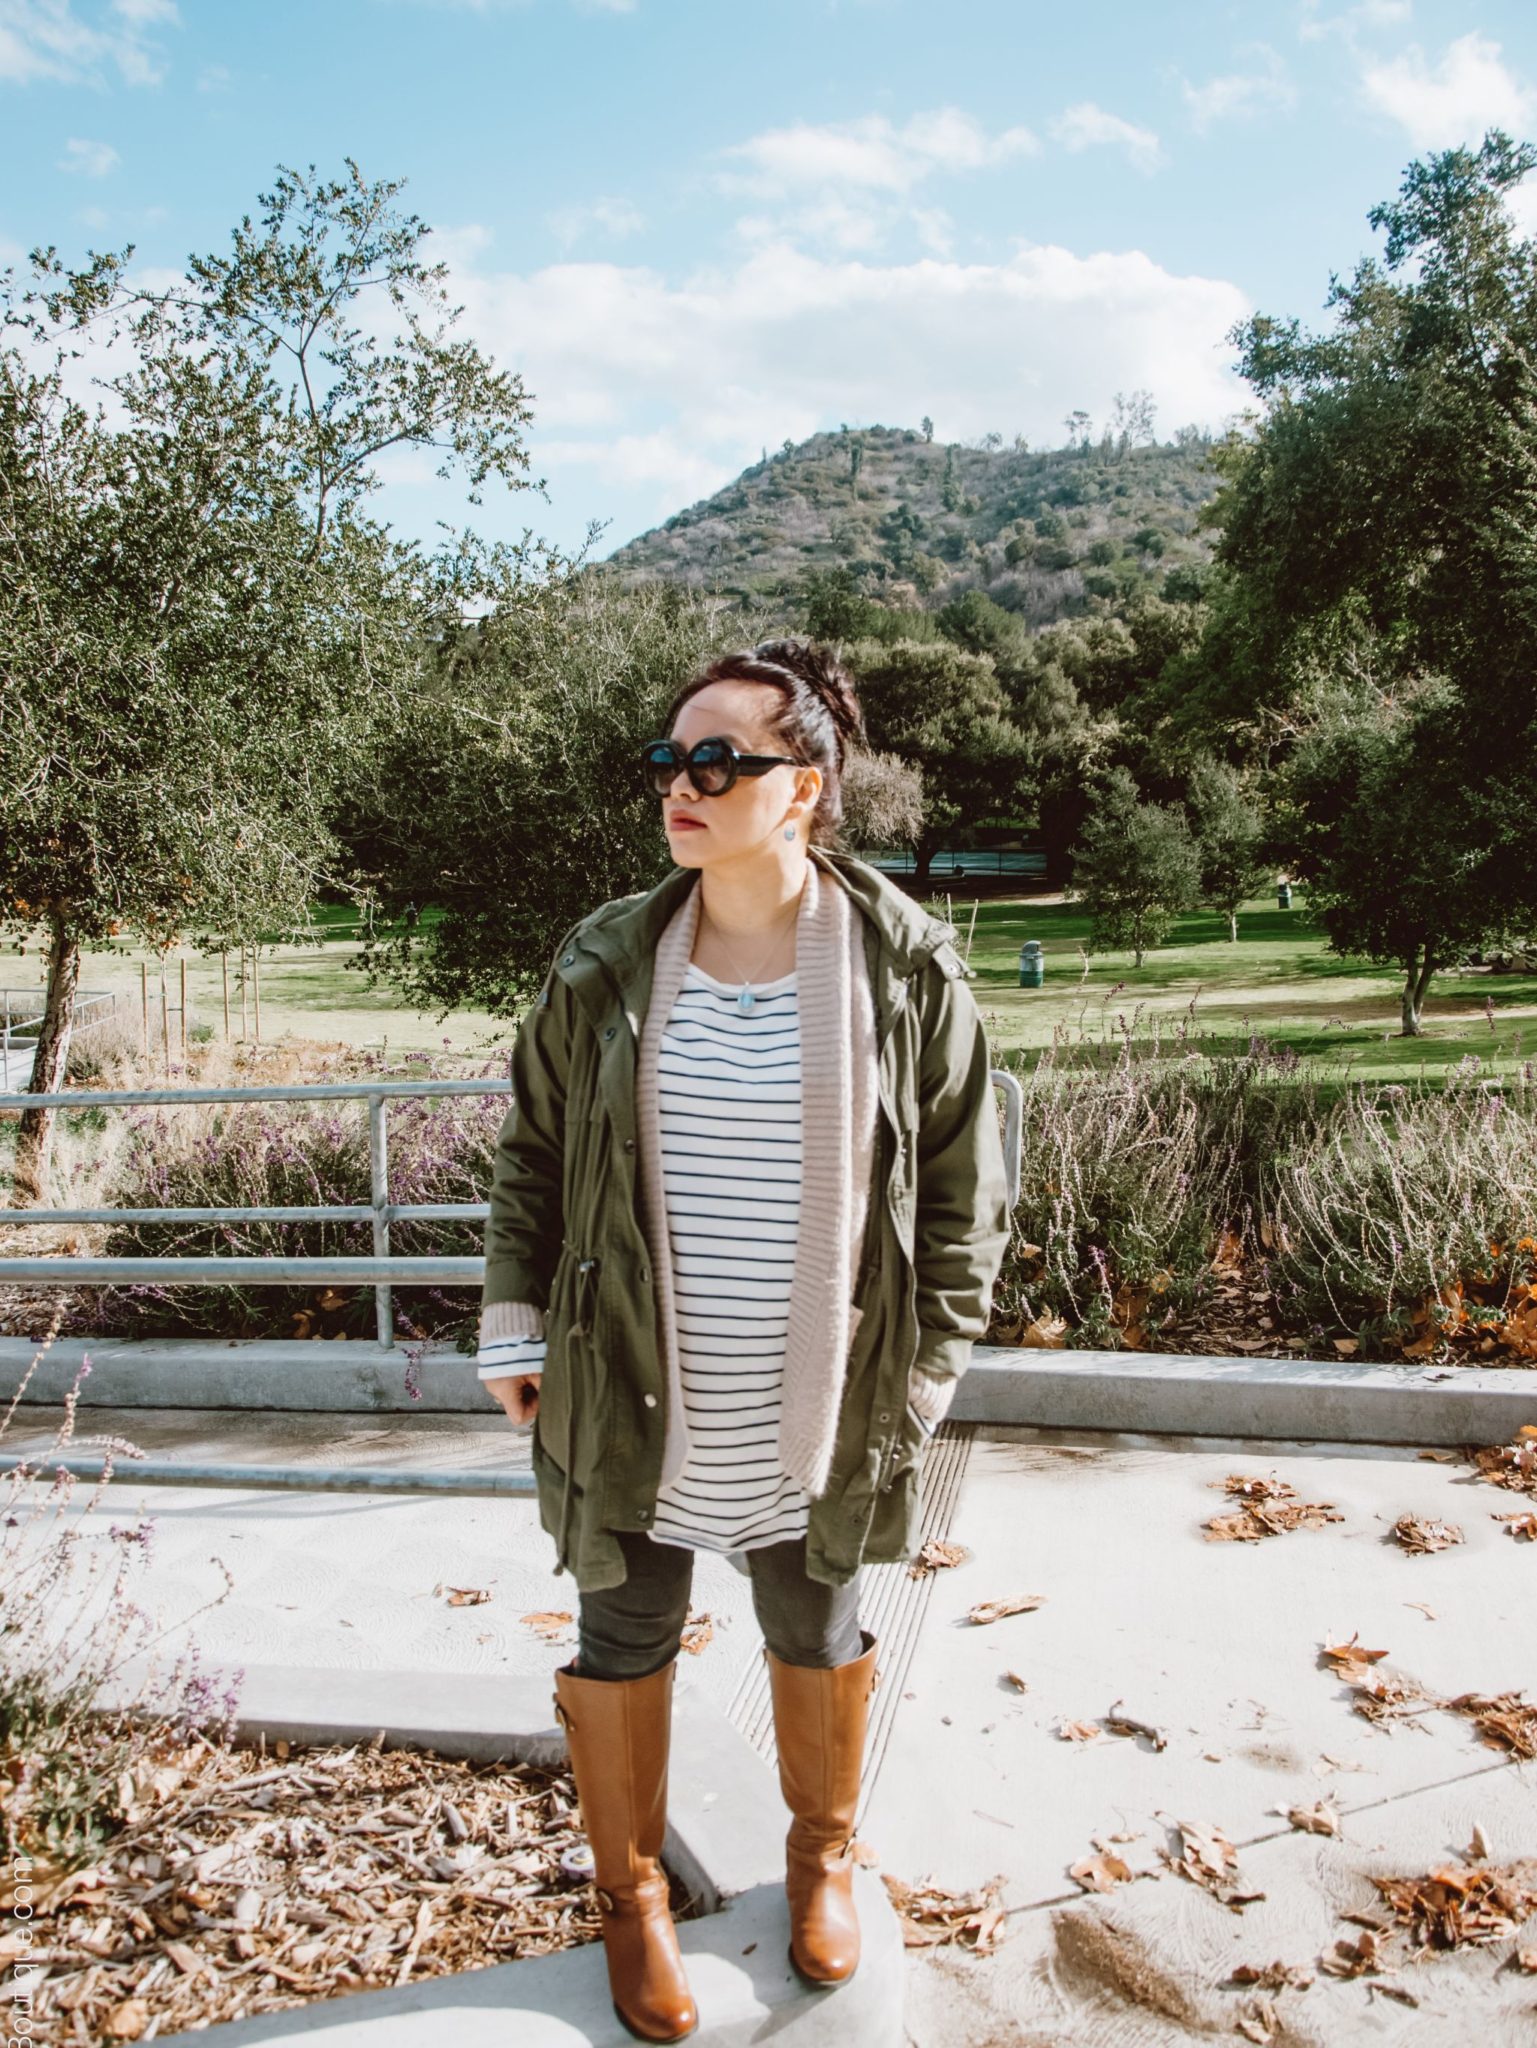 instagram-pslilyboutique-pinterest-Los-Angeles-fashion-blogger-top-fashion-blog-fashion-&-personal-style-travel-blogger-olive-green-jason-maxwell-anorak-jacket-spring-2019-outfit-ideas-1-22-19